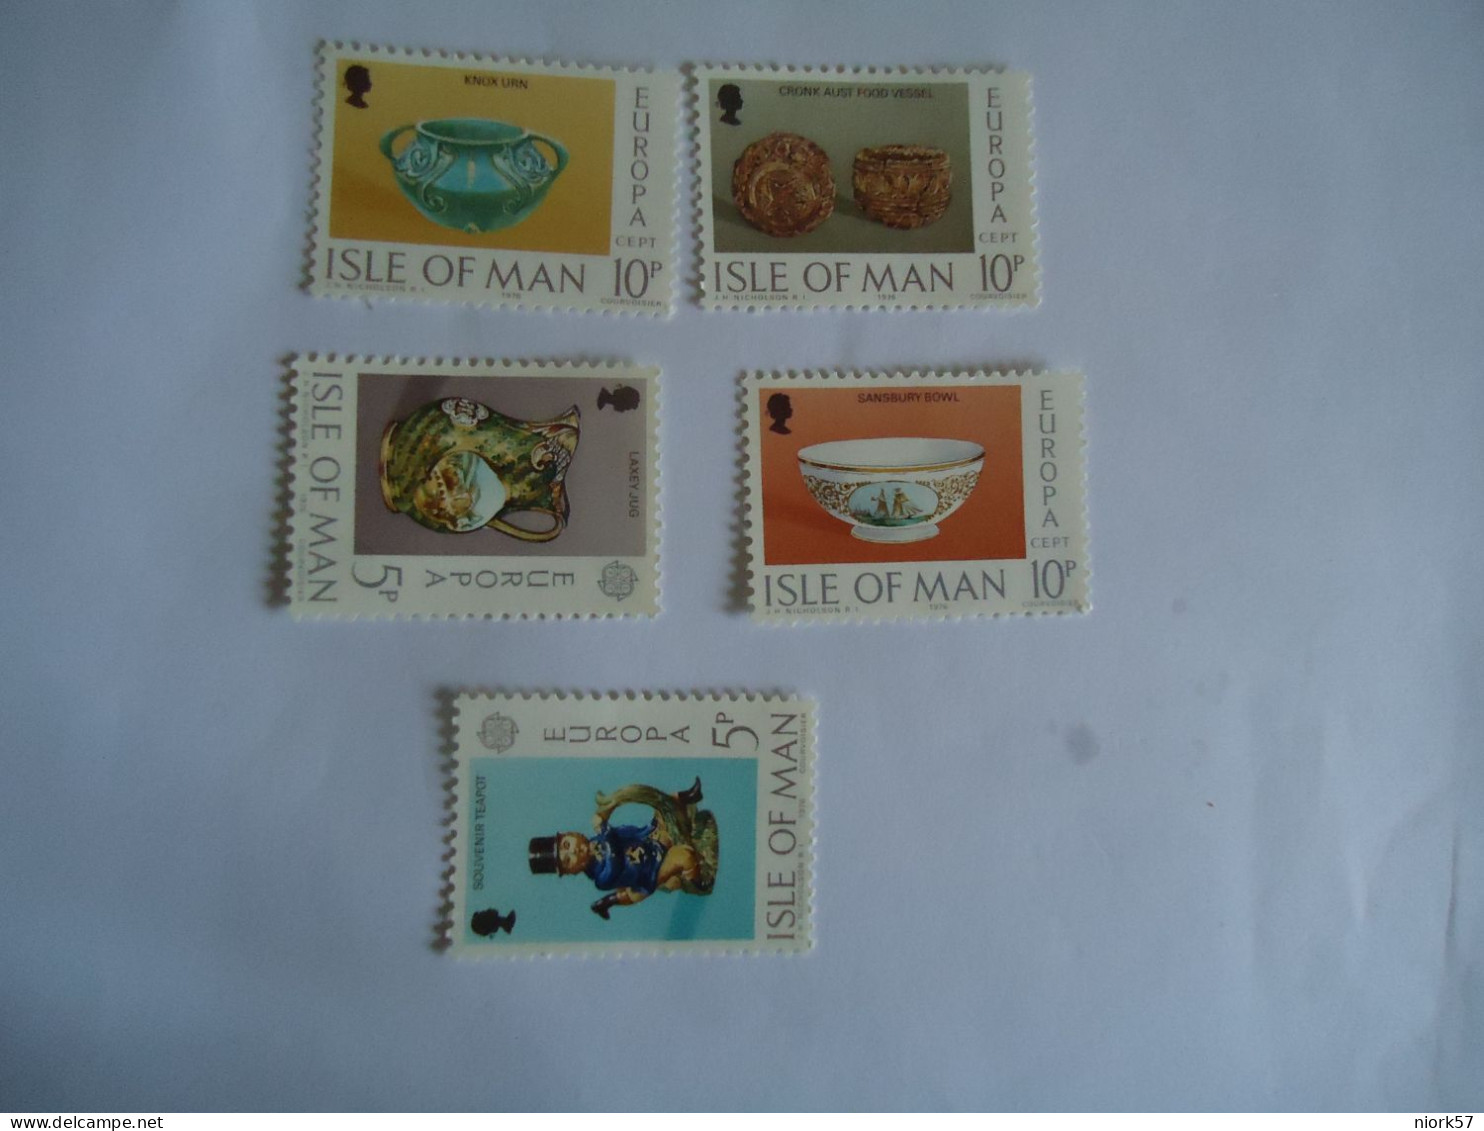 ISLE OF MAN  MNH 5 STAMPS  EUROPA 1976 MUSEUMS - 1978